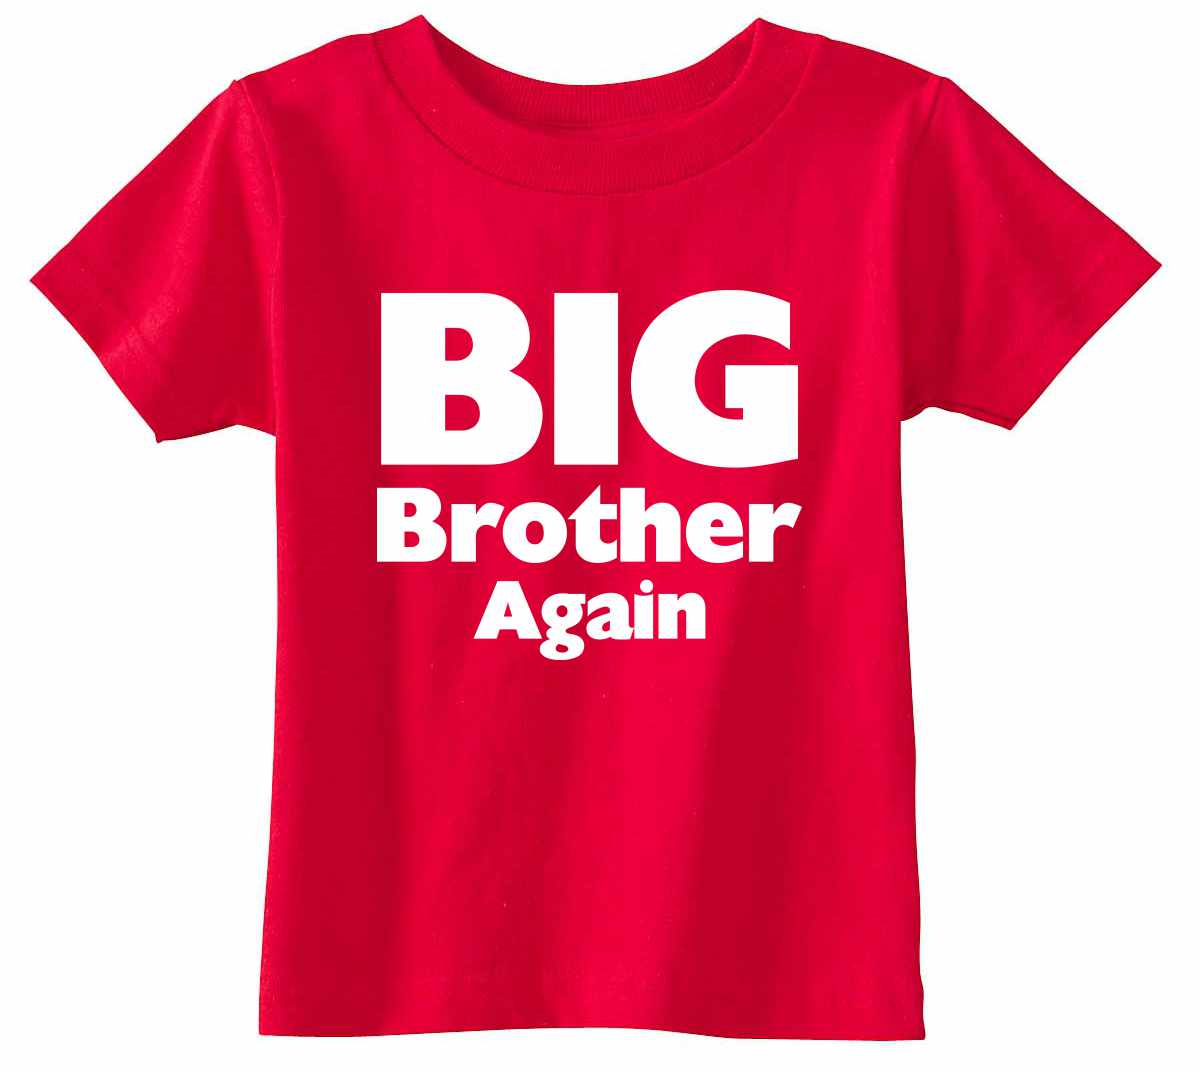 Big Brother Again on Infant-Toddler T-Shirt (#1333-7)